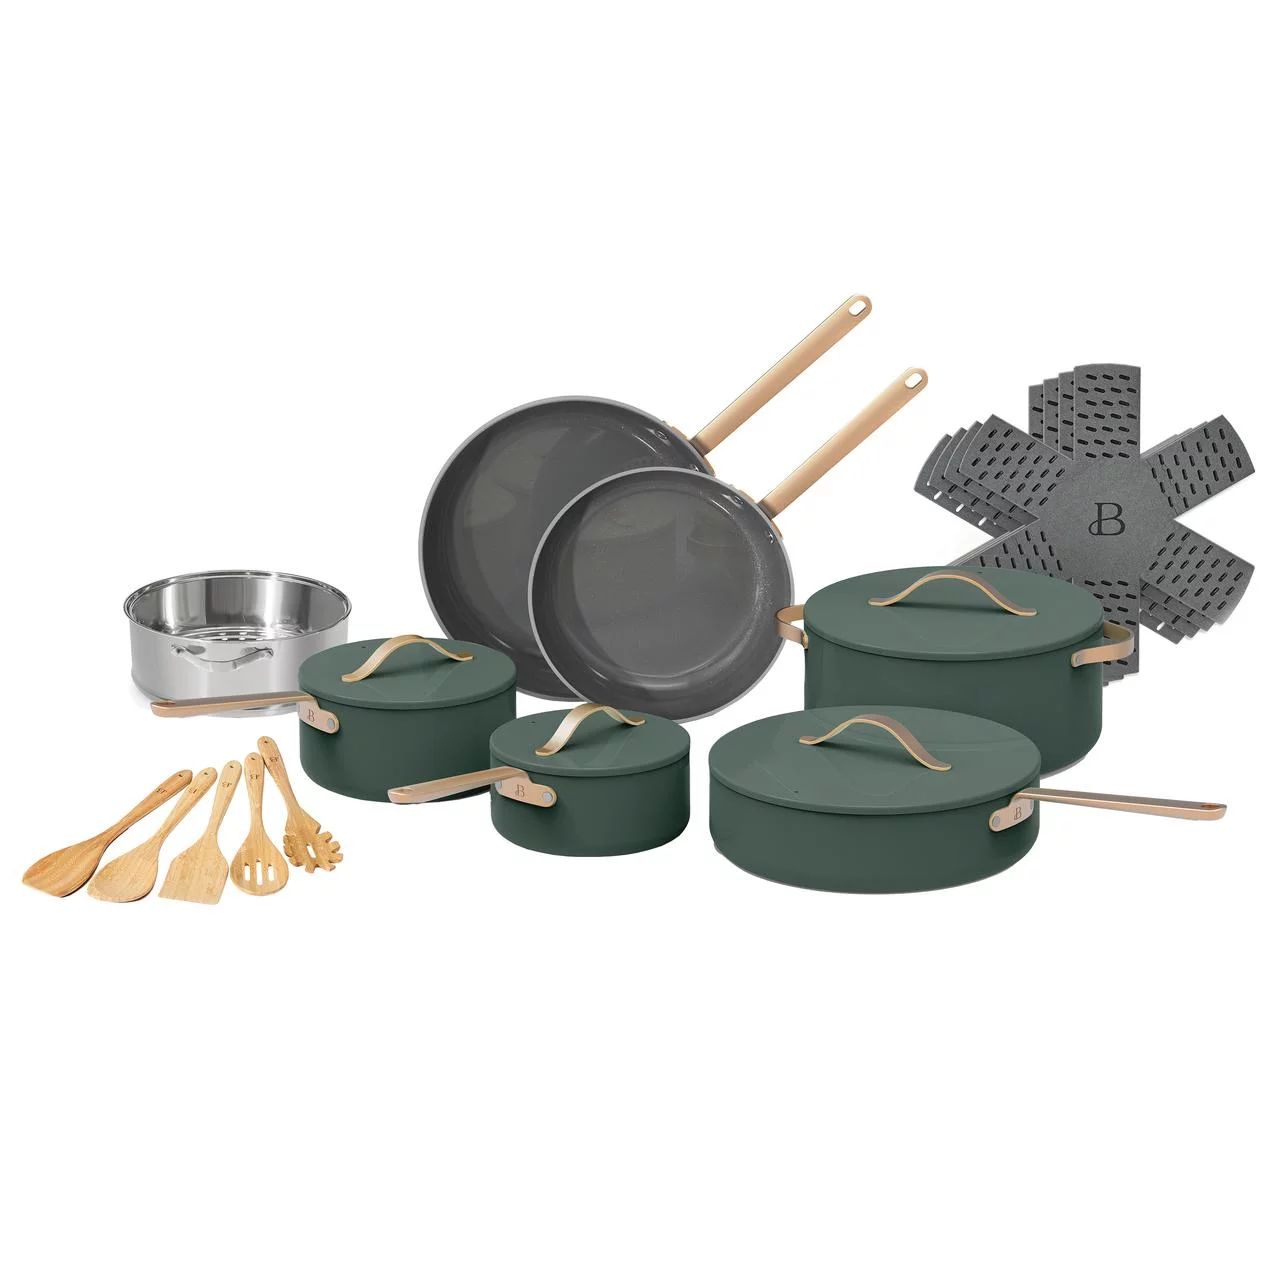 Beautiful 20pc Ceramic Non-Stick Cookware Set, Thyme Green by Drew Barrymore | Walmart (US)